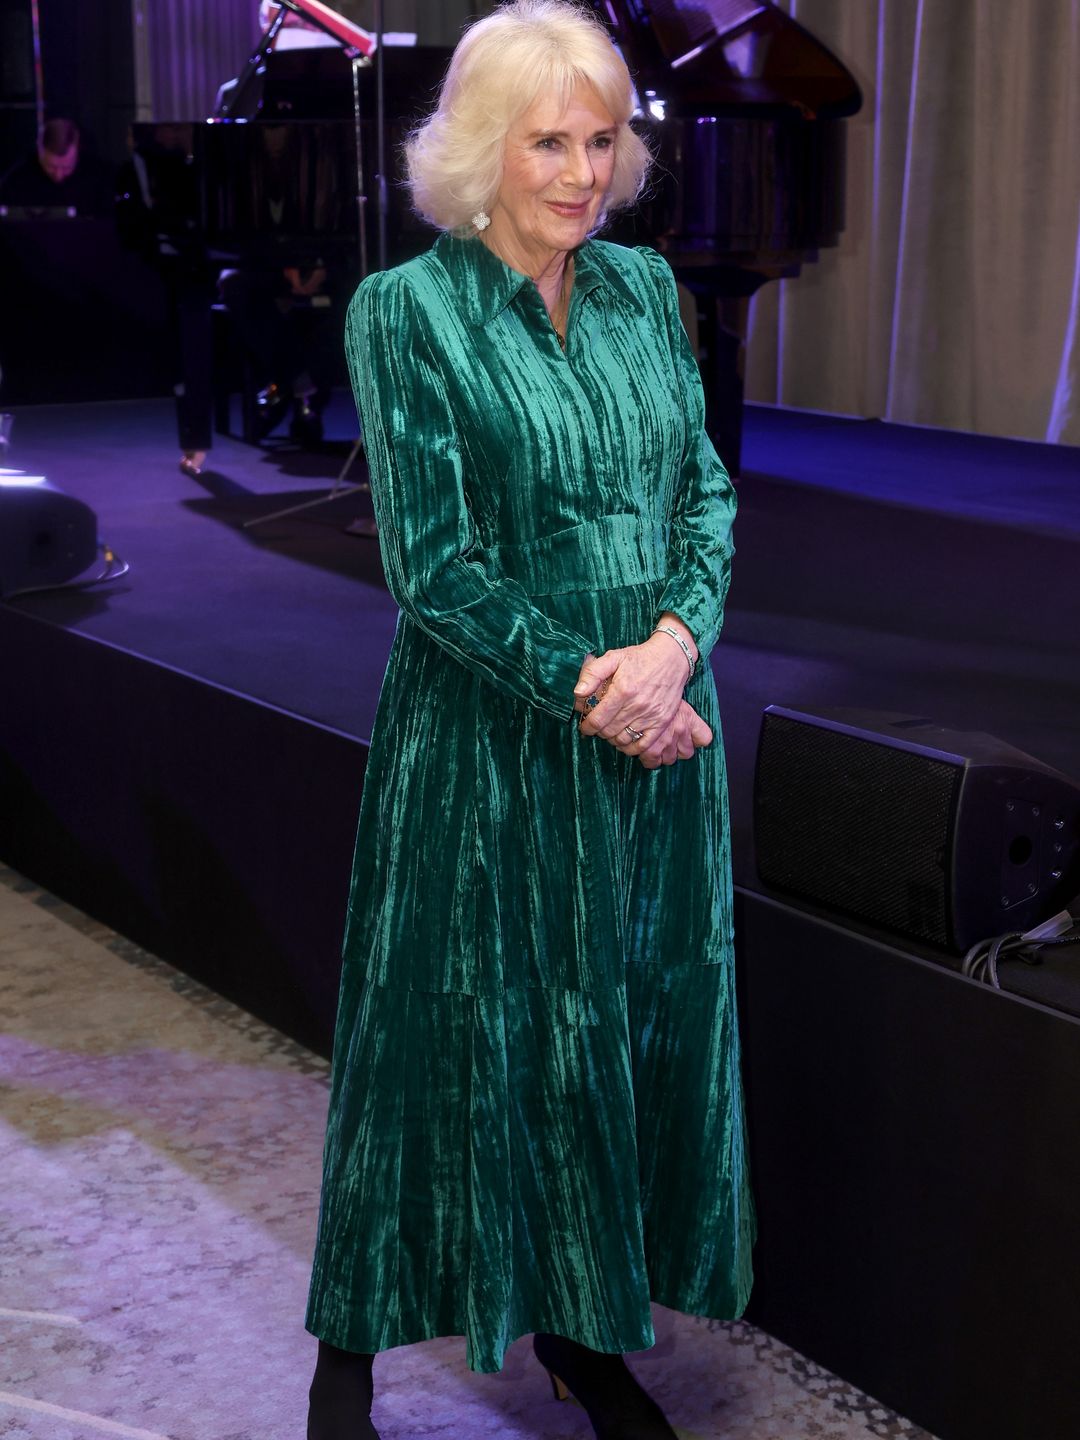 Queen Camilla recycled a velvet emerald green dress for her London outing